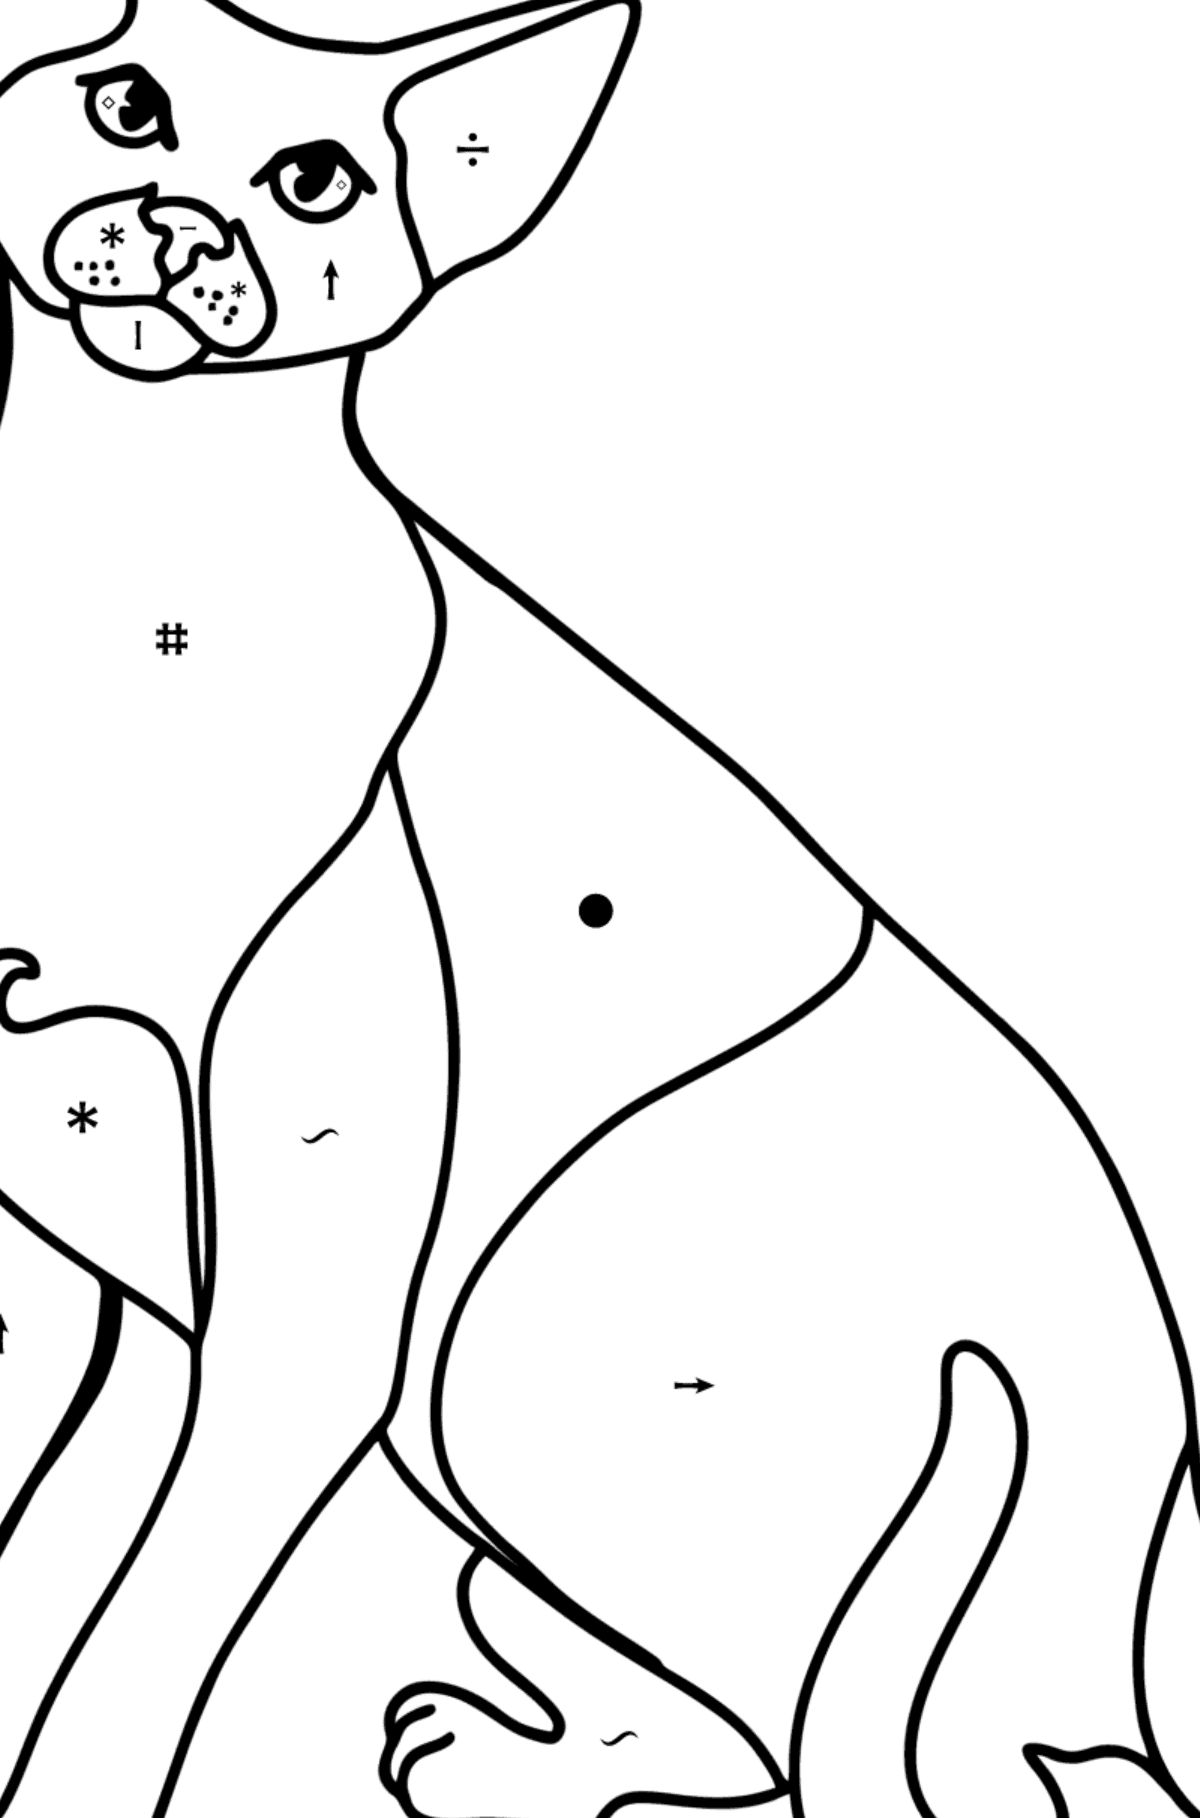 Oriental Shorthair Cat coloring page - Coloring by Symbols for Kids